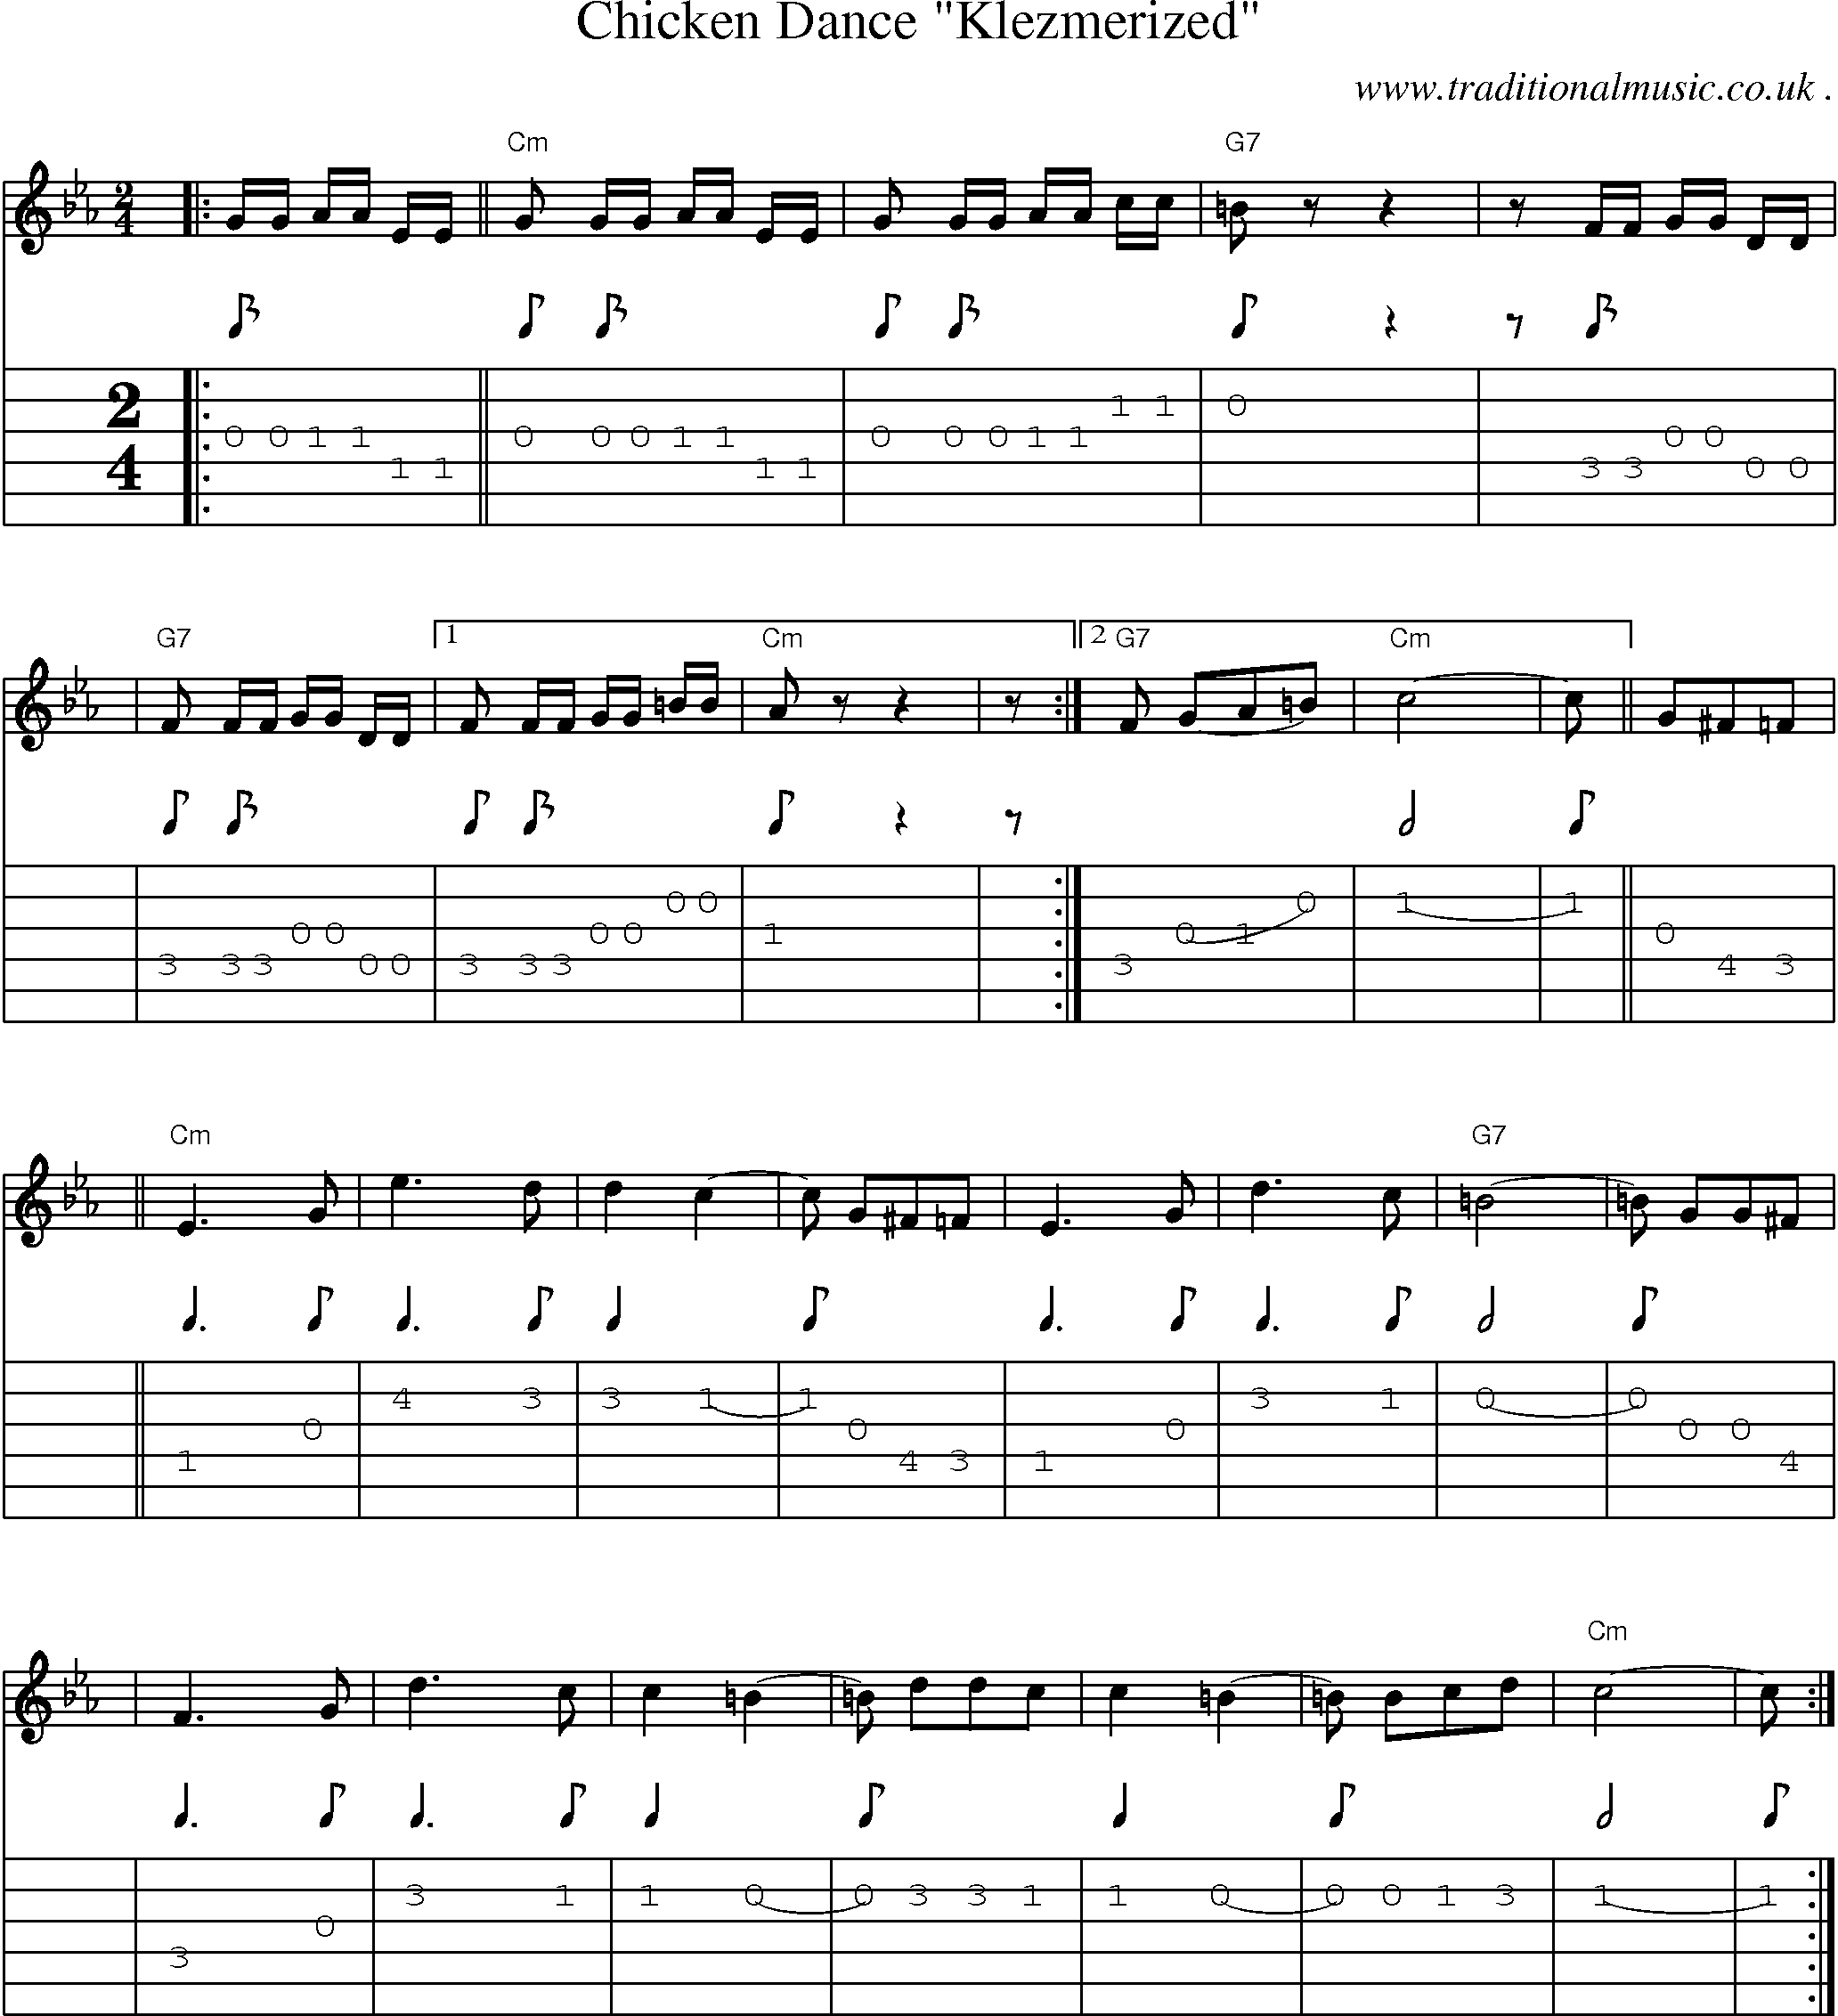 Music Score and Guitar Tabs for Chicken Dance Klezmerized